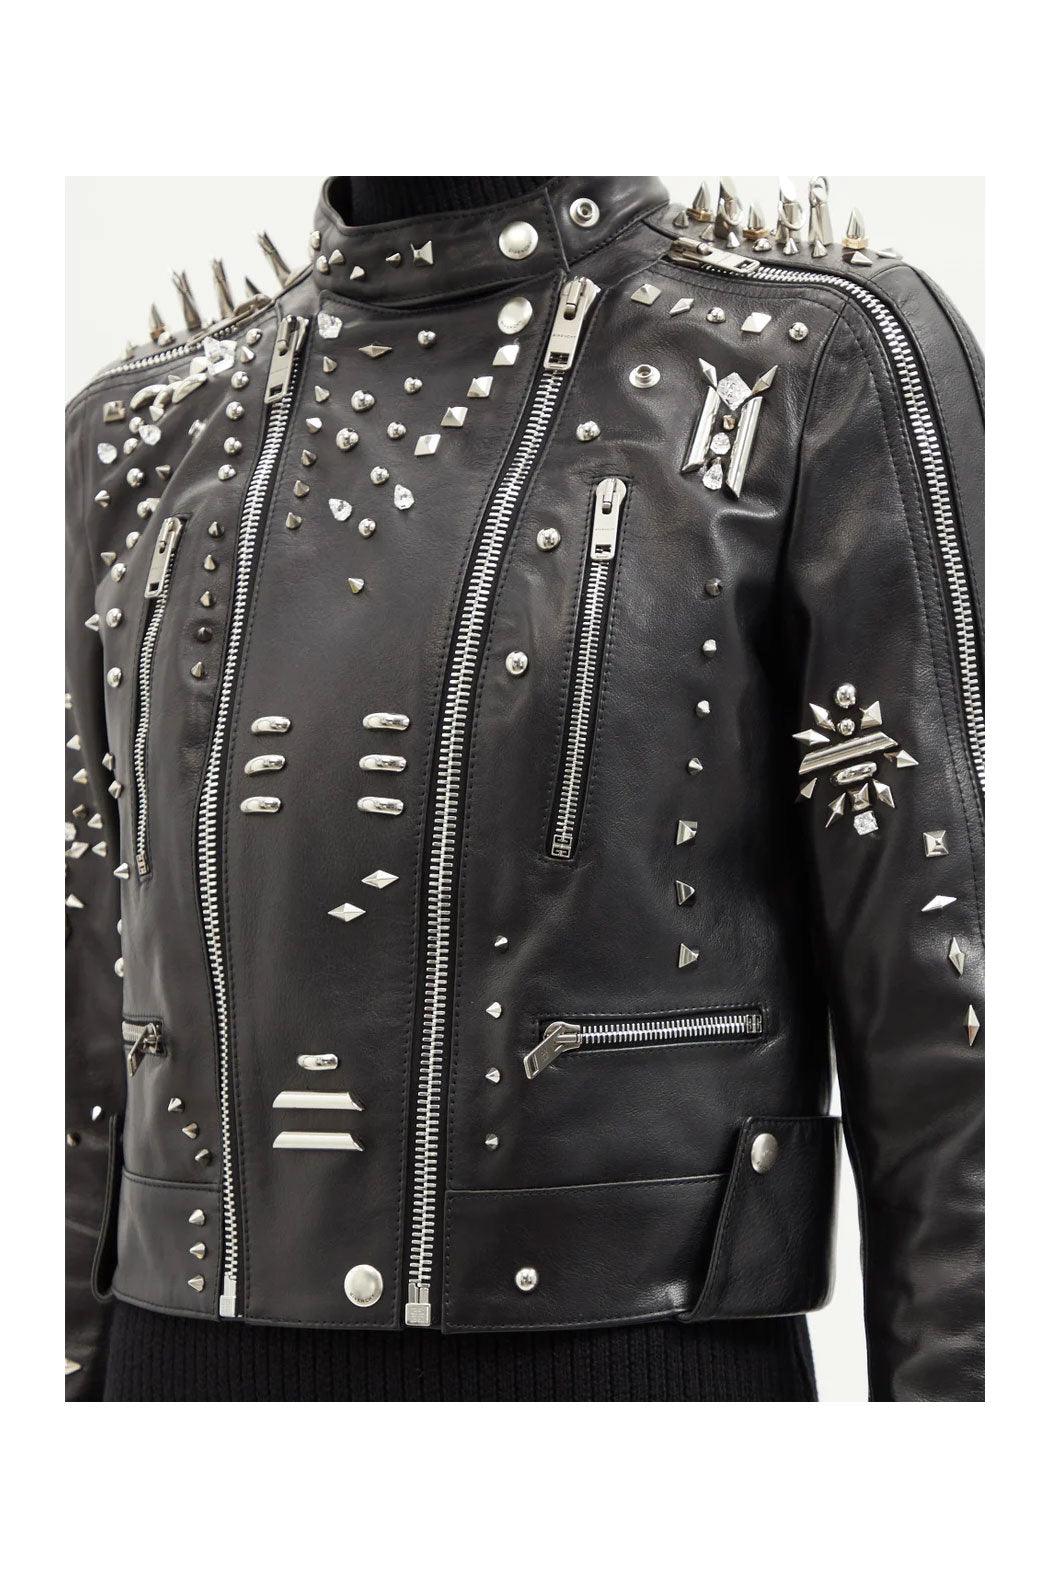 Black Women style Silver Long Spiked Studded Motorcycle Leather Jacket